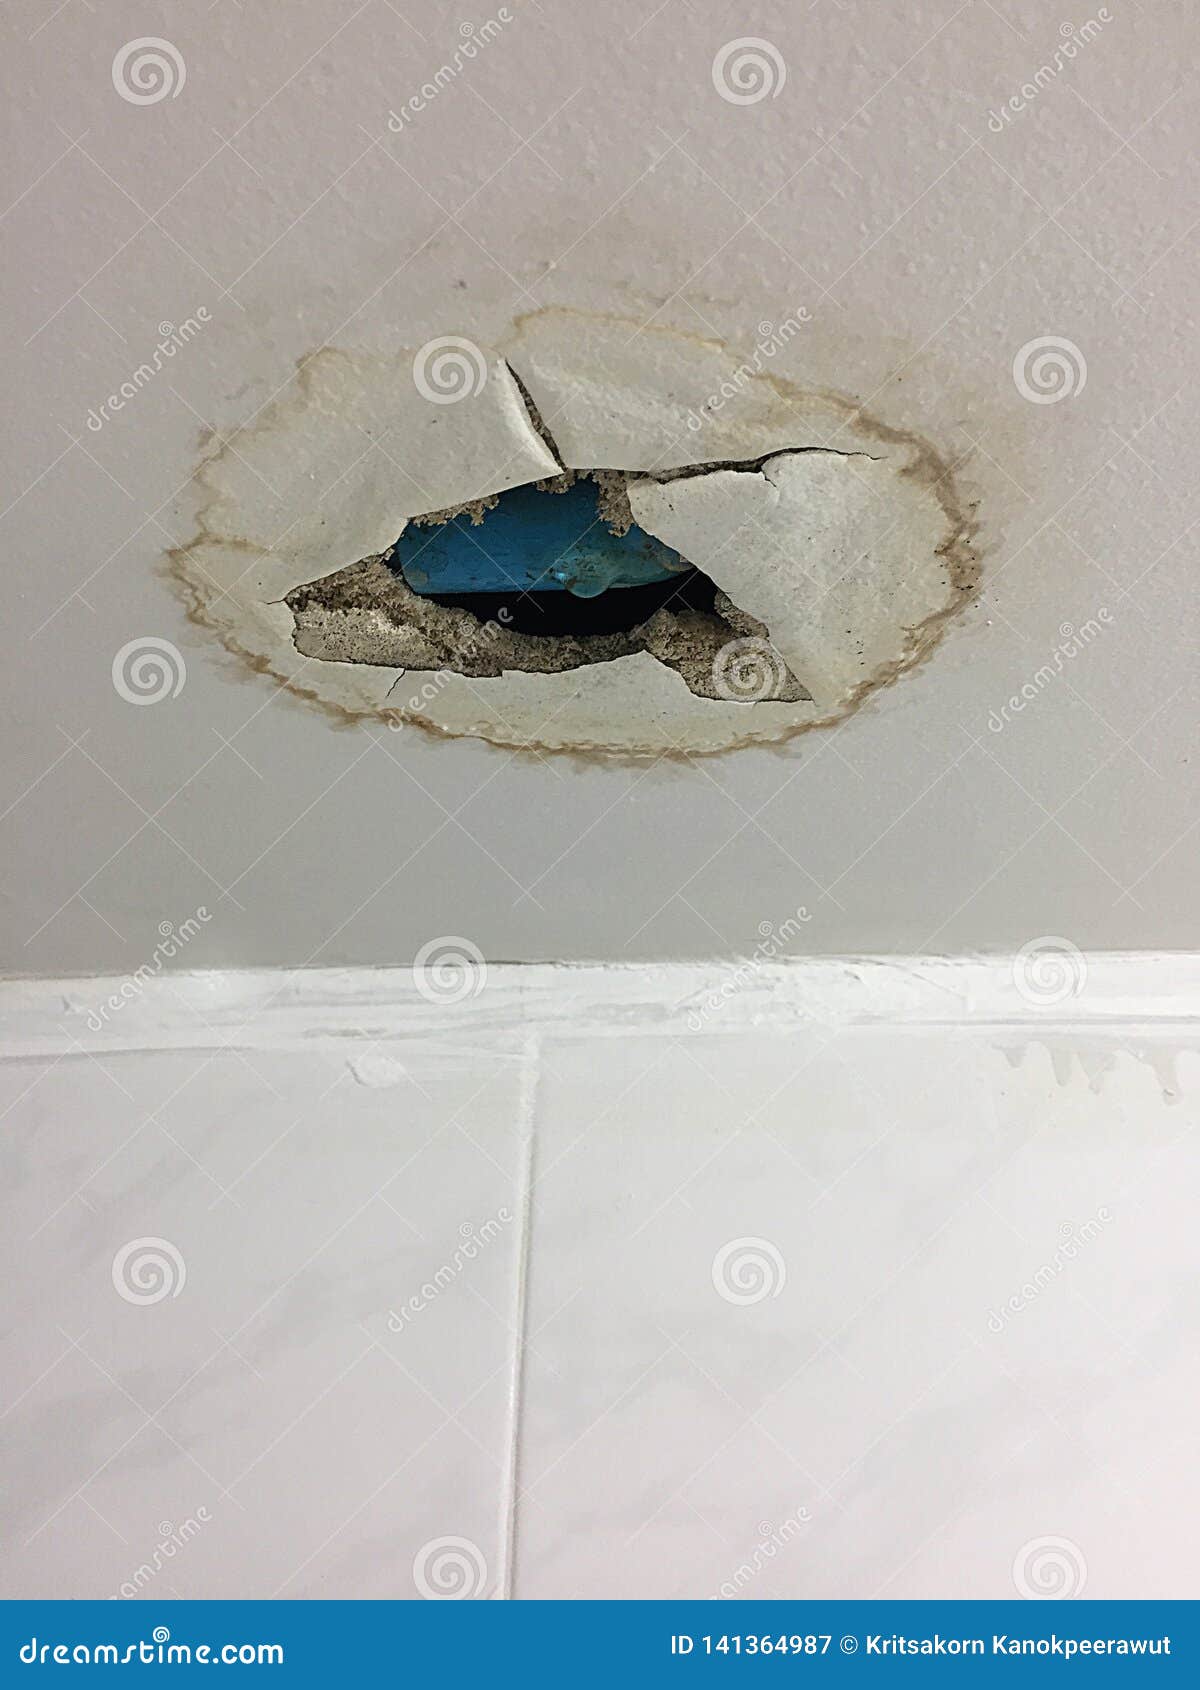 Ceiling Is A Hole From A Damaged Water Pipe Stock Image Image Of